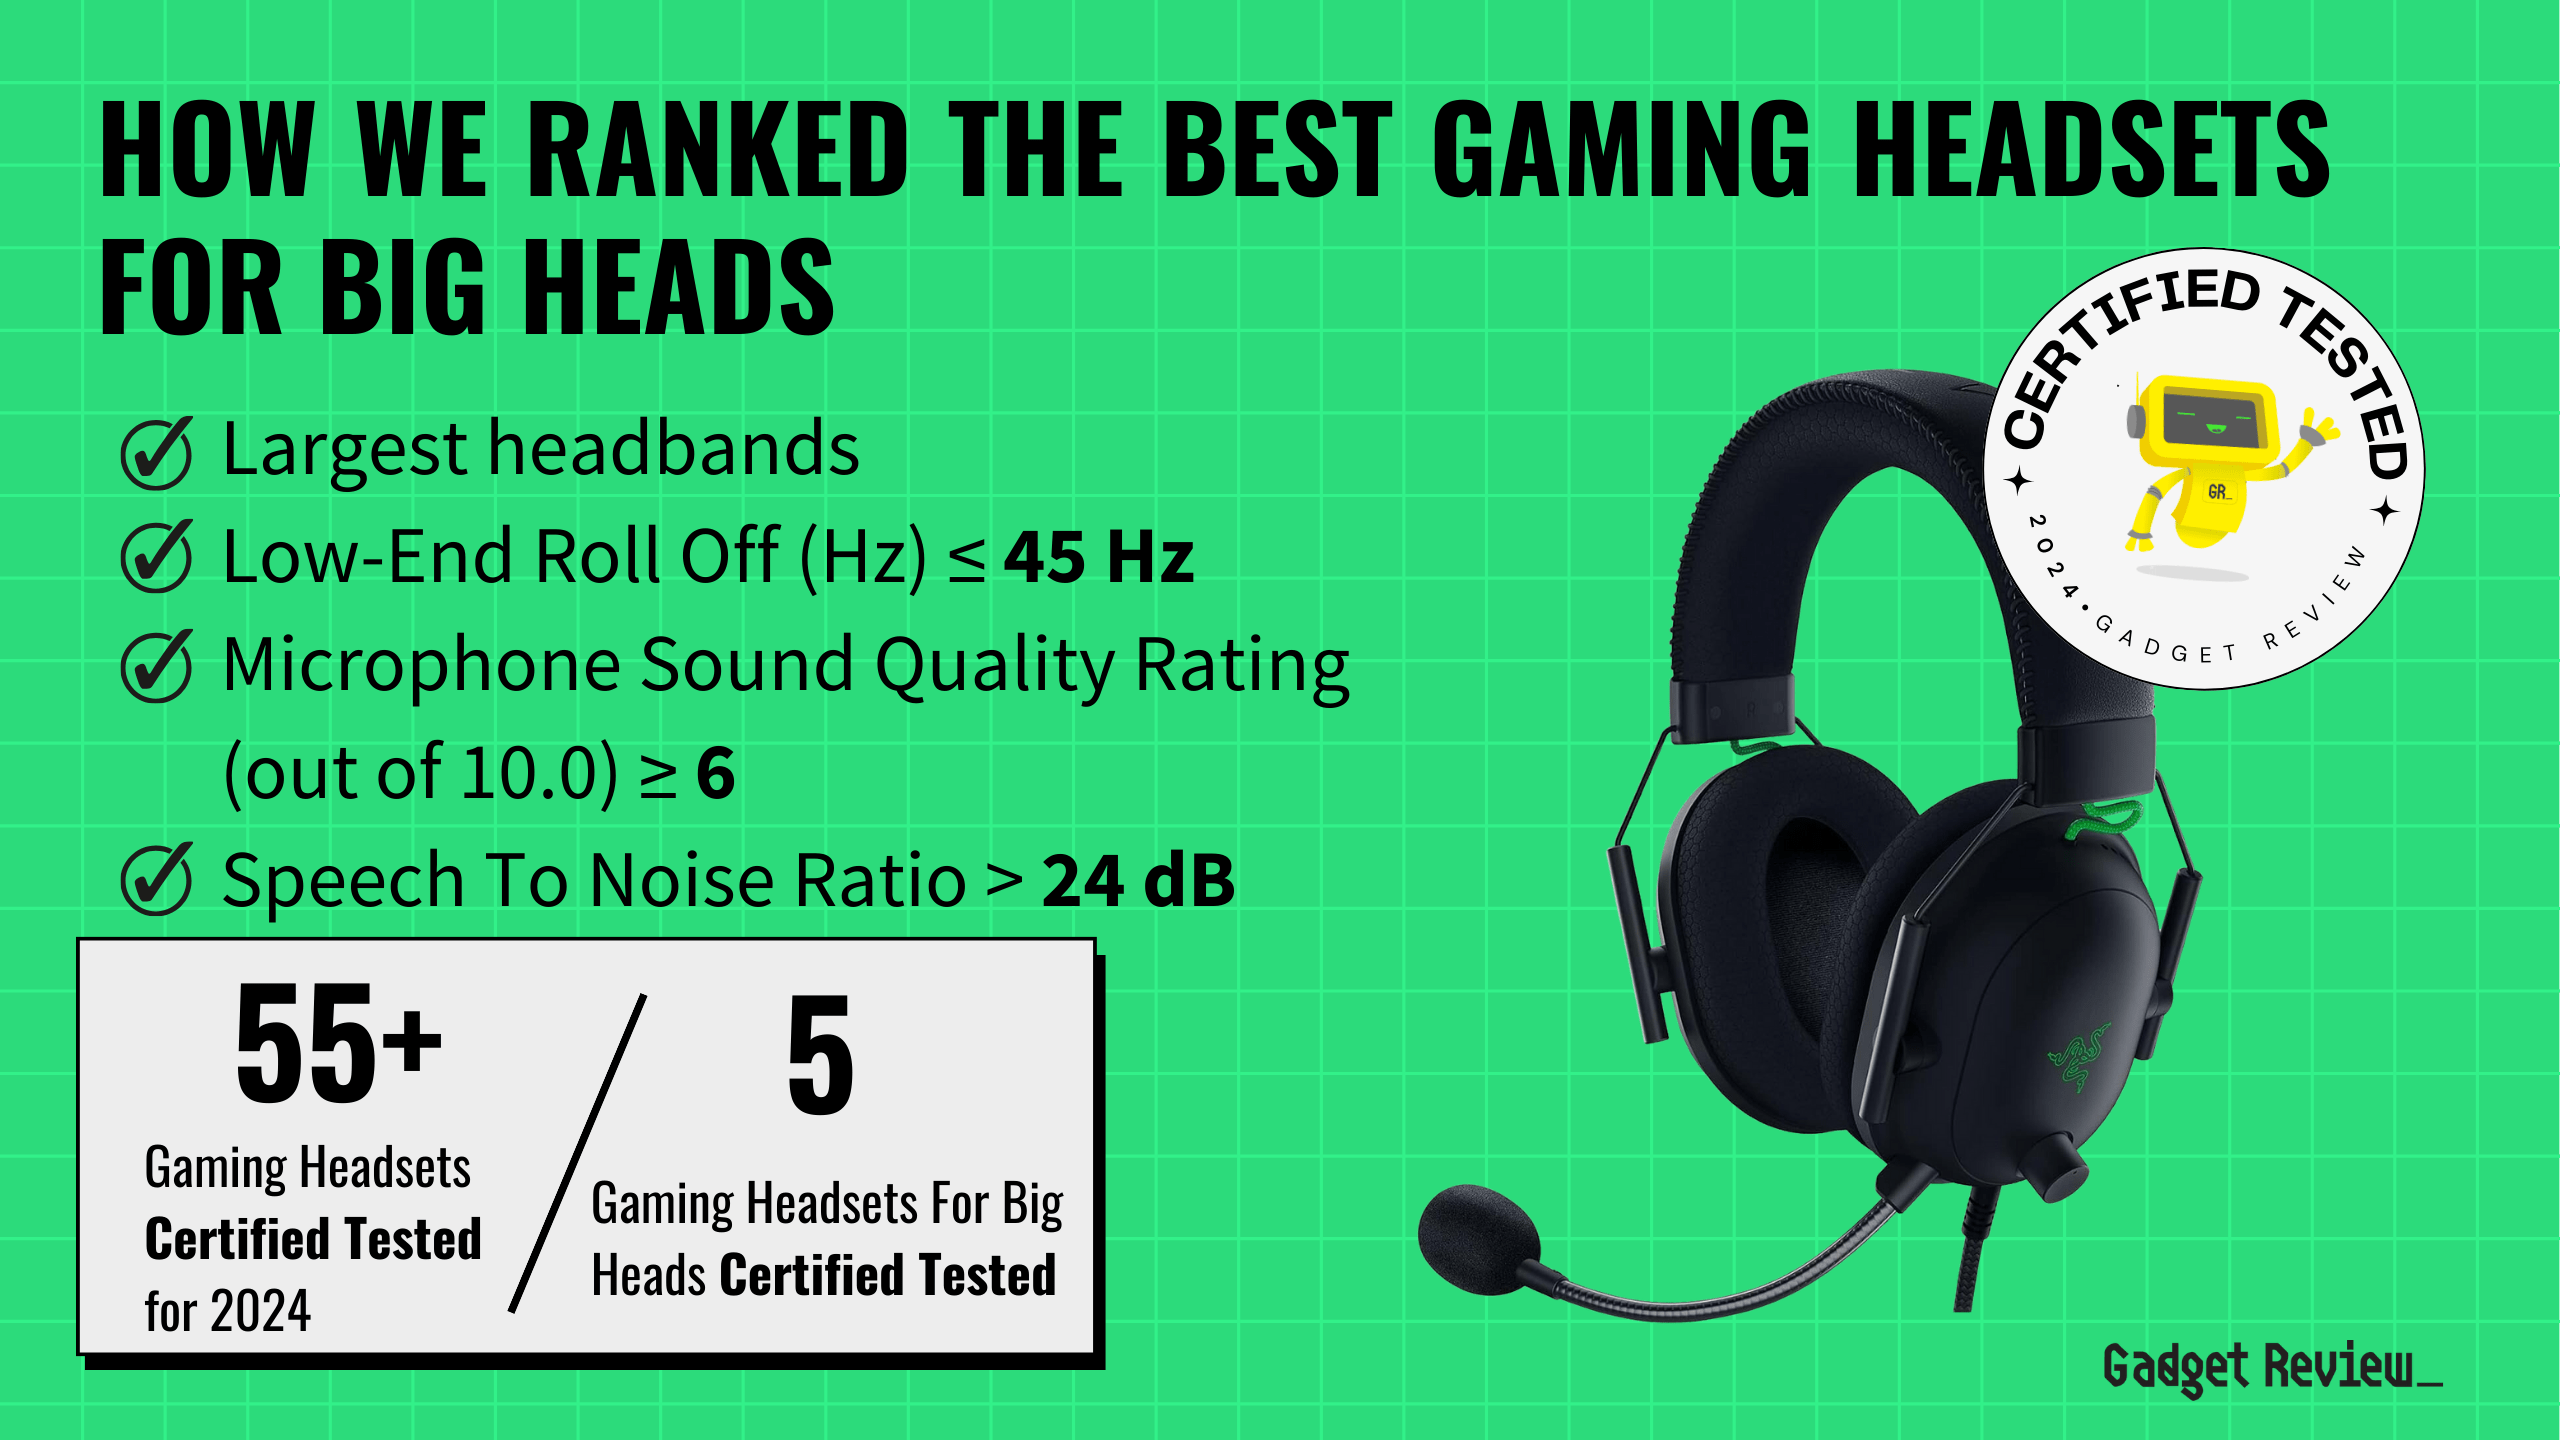 What Are The Top 5 Gaming Headsets for Big Heads?